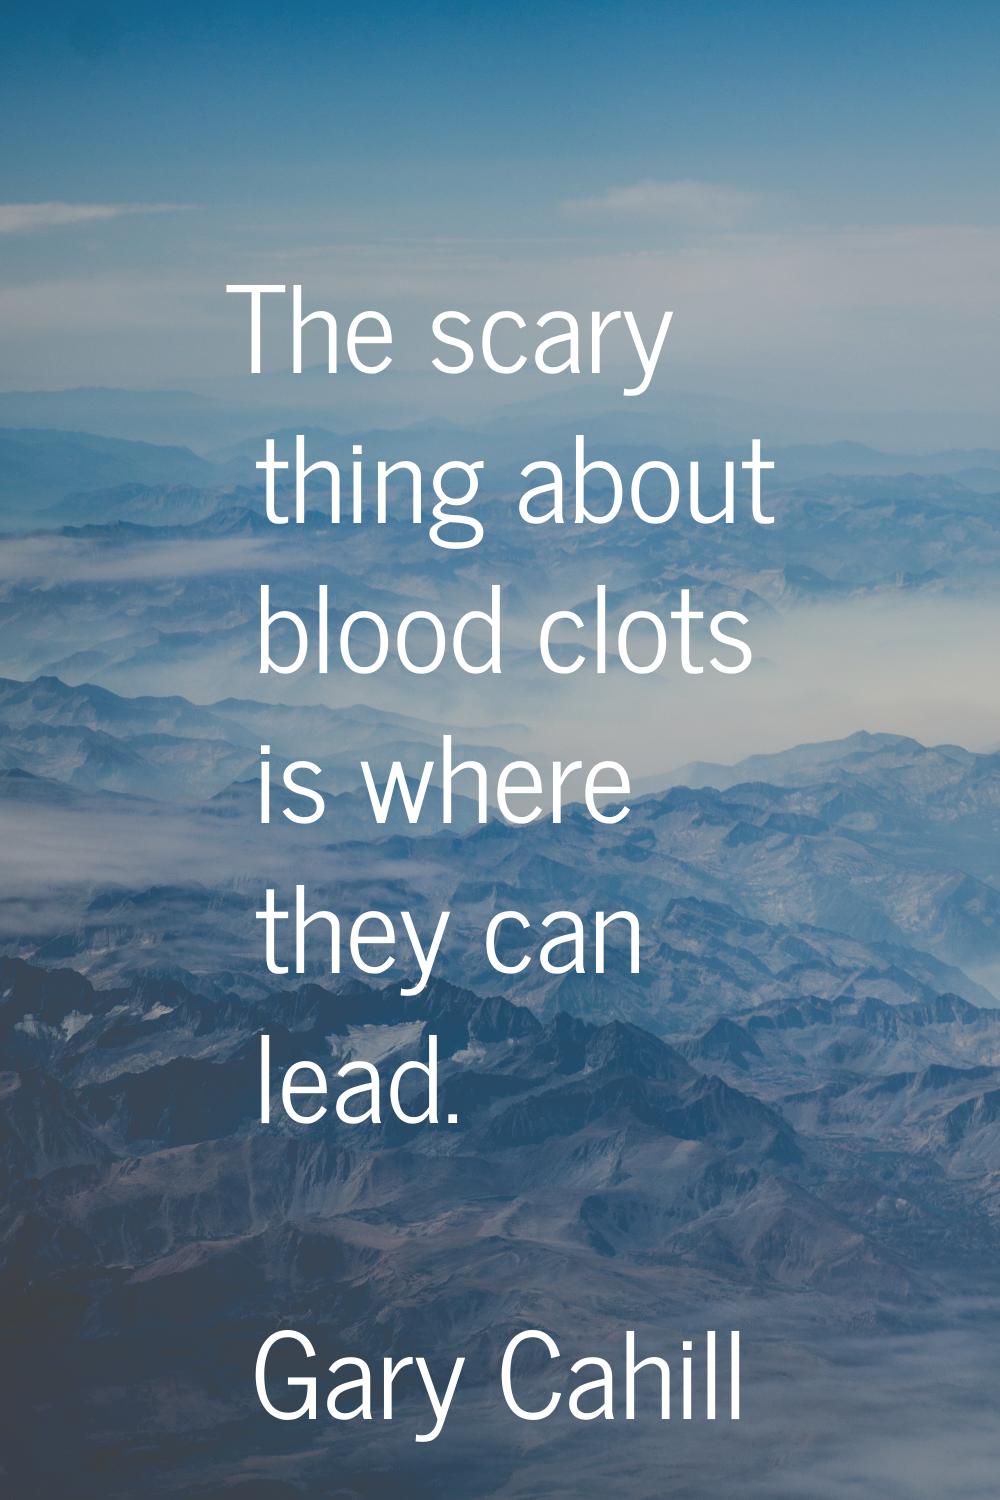 The scary thing about blood clots is where they can lead.